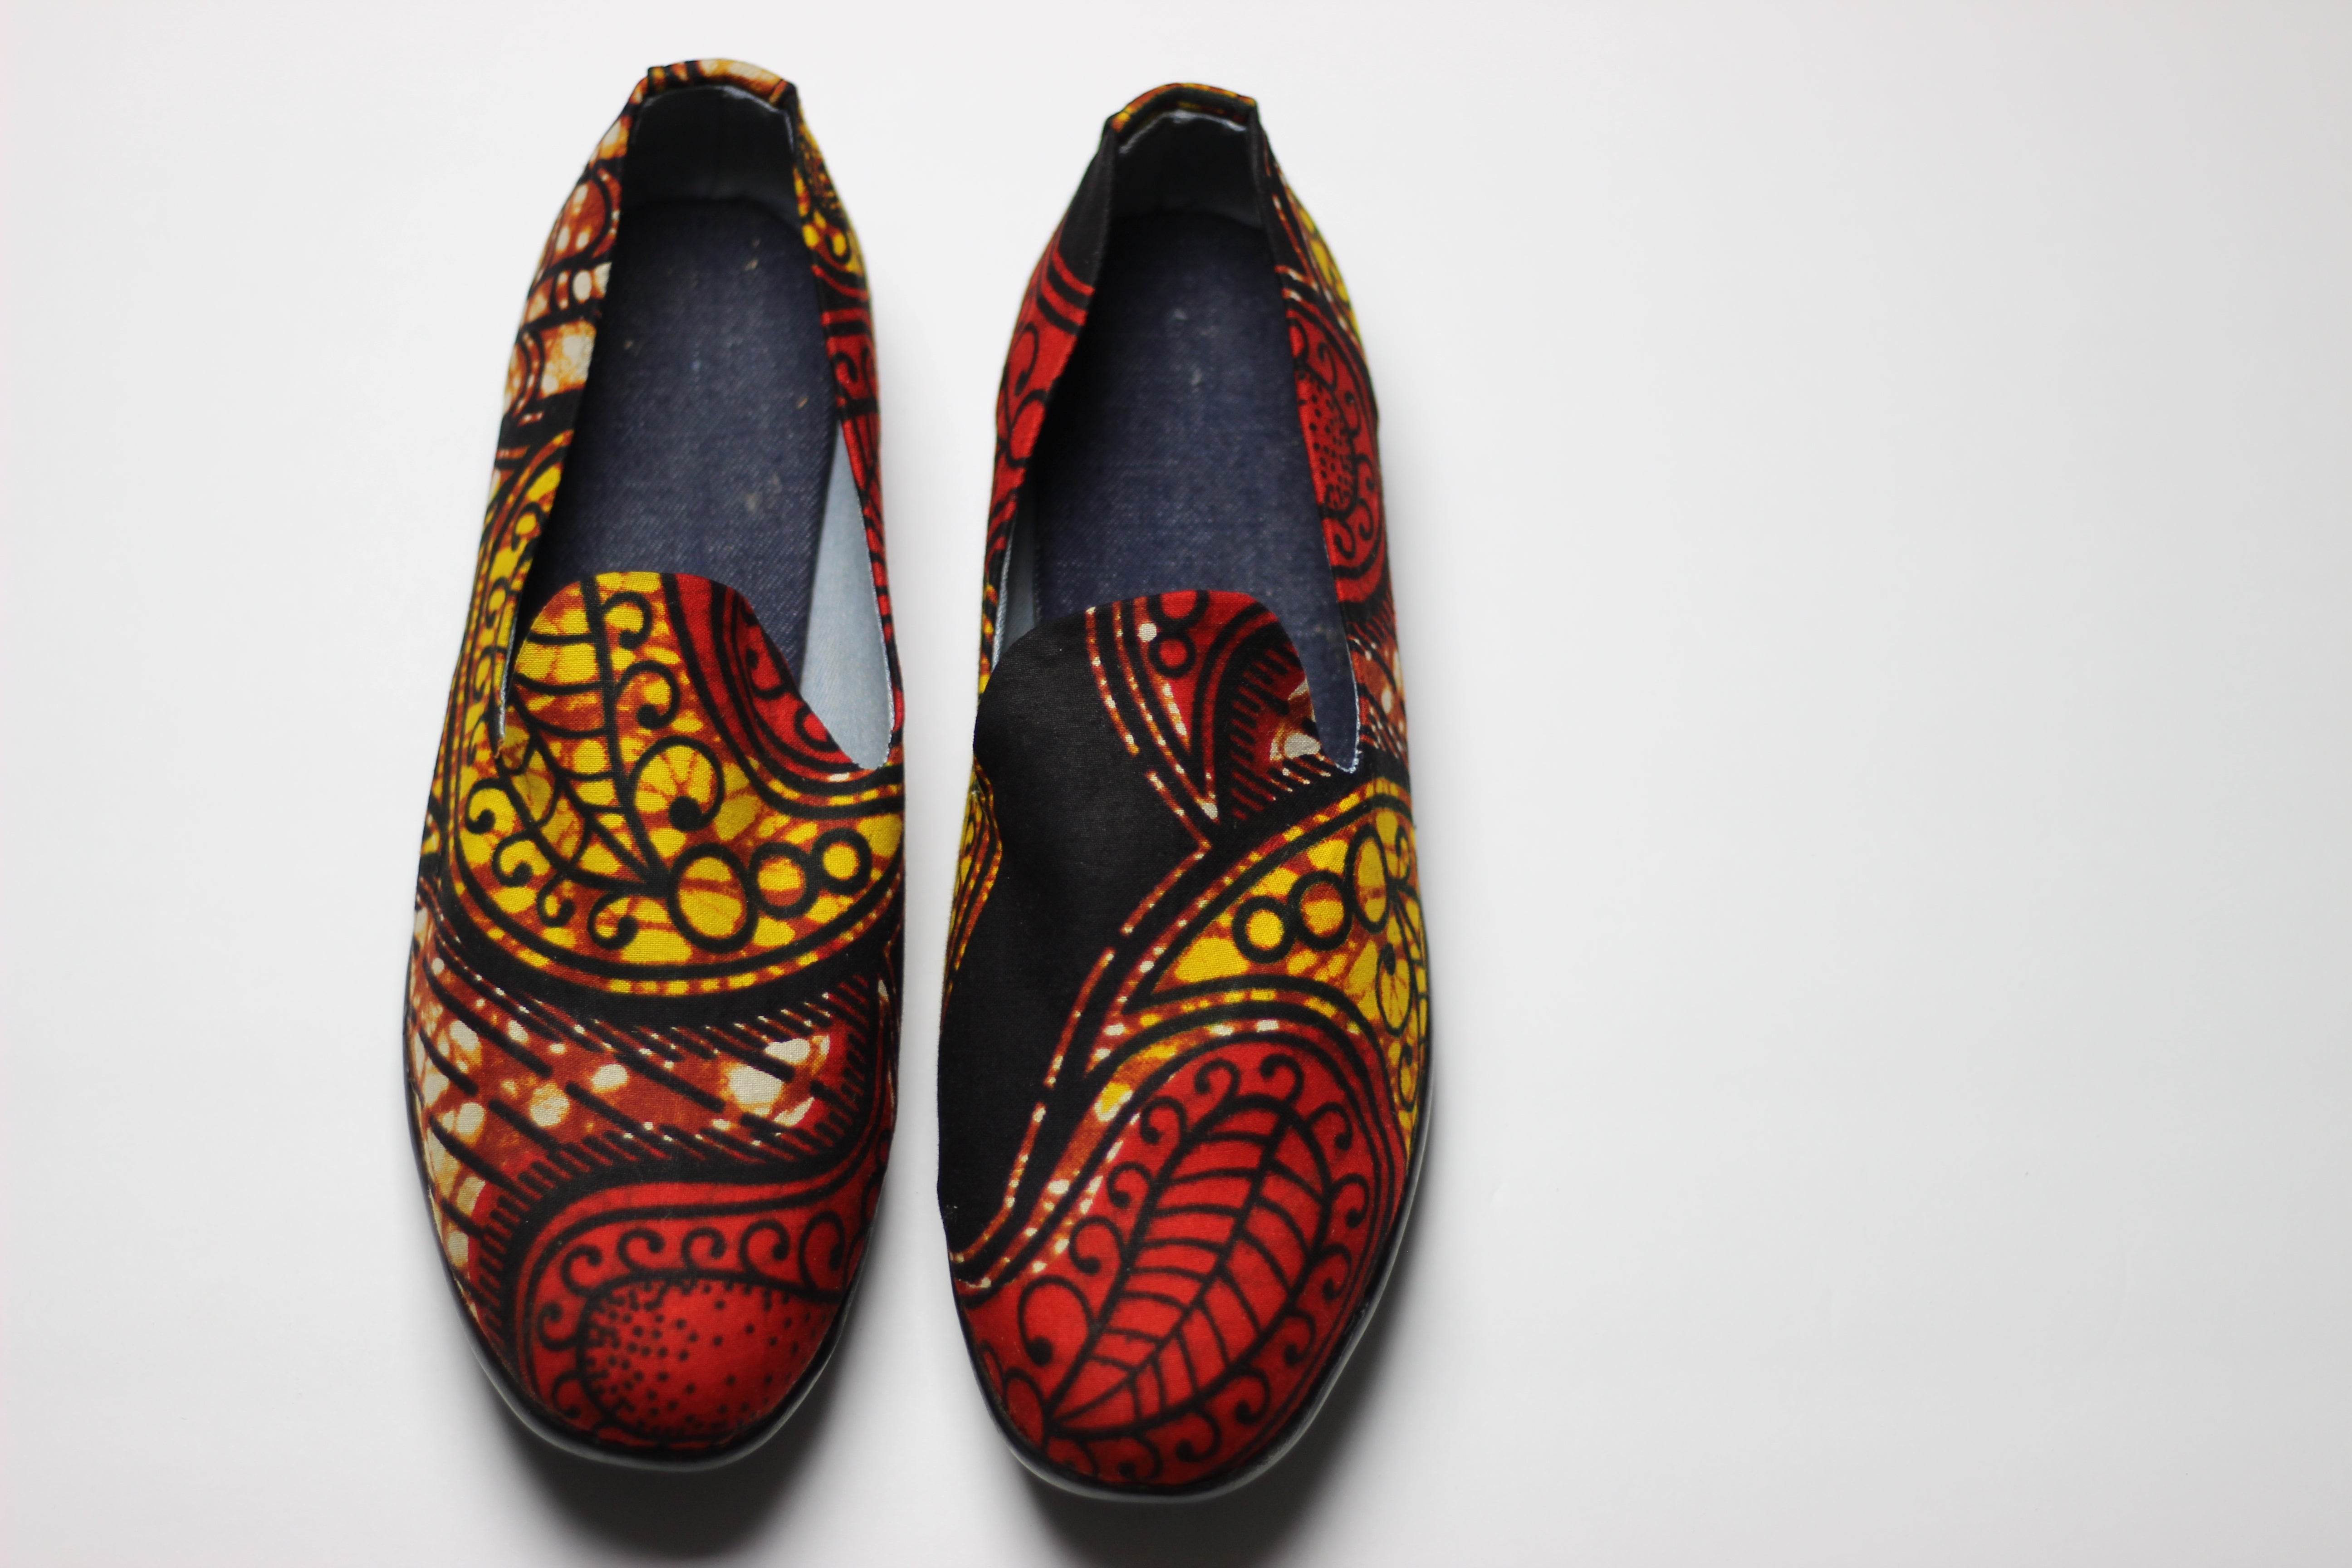 African Print /Ankara Flat Shoes /Loafers(slip ons) - Red,Yellow and Brown Floral Print. - Africas Closet